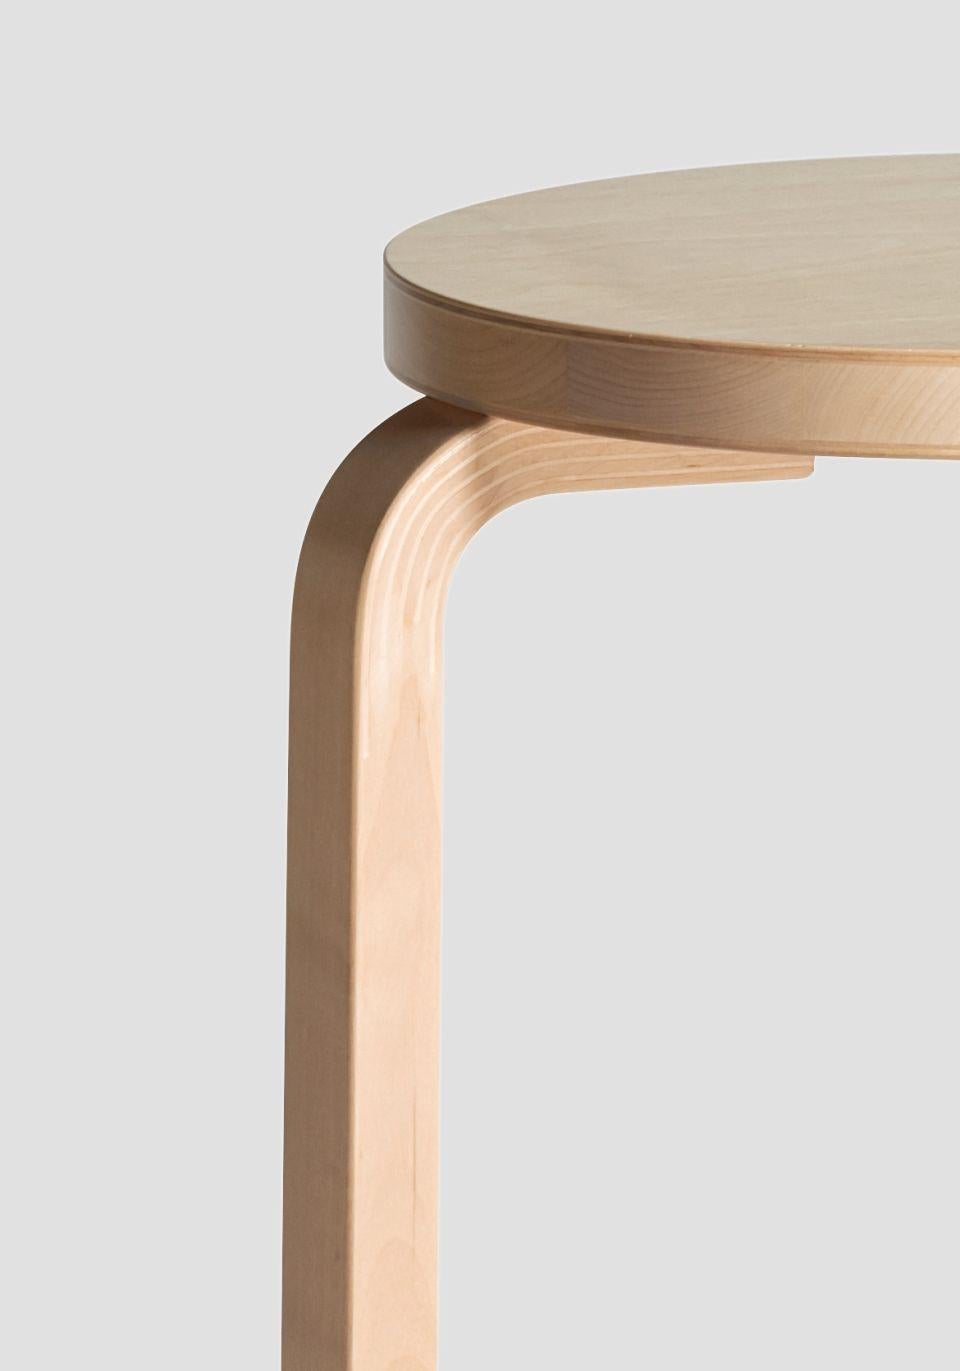 Authentic stool 60 in birch by Alvar Aalto & Artek. In the late 1920s, architect and designer Alvar Aalto began experimenting with bending wood. In collaboration with furniture manufacturer Otto Korhonen, the Finnish master developed a